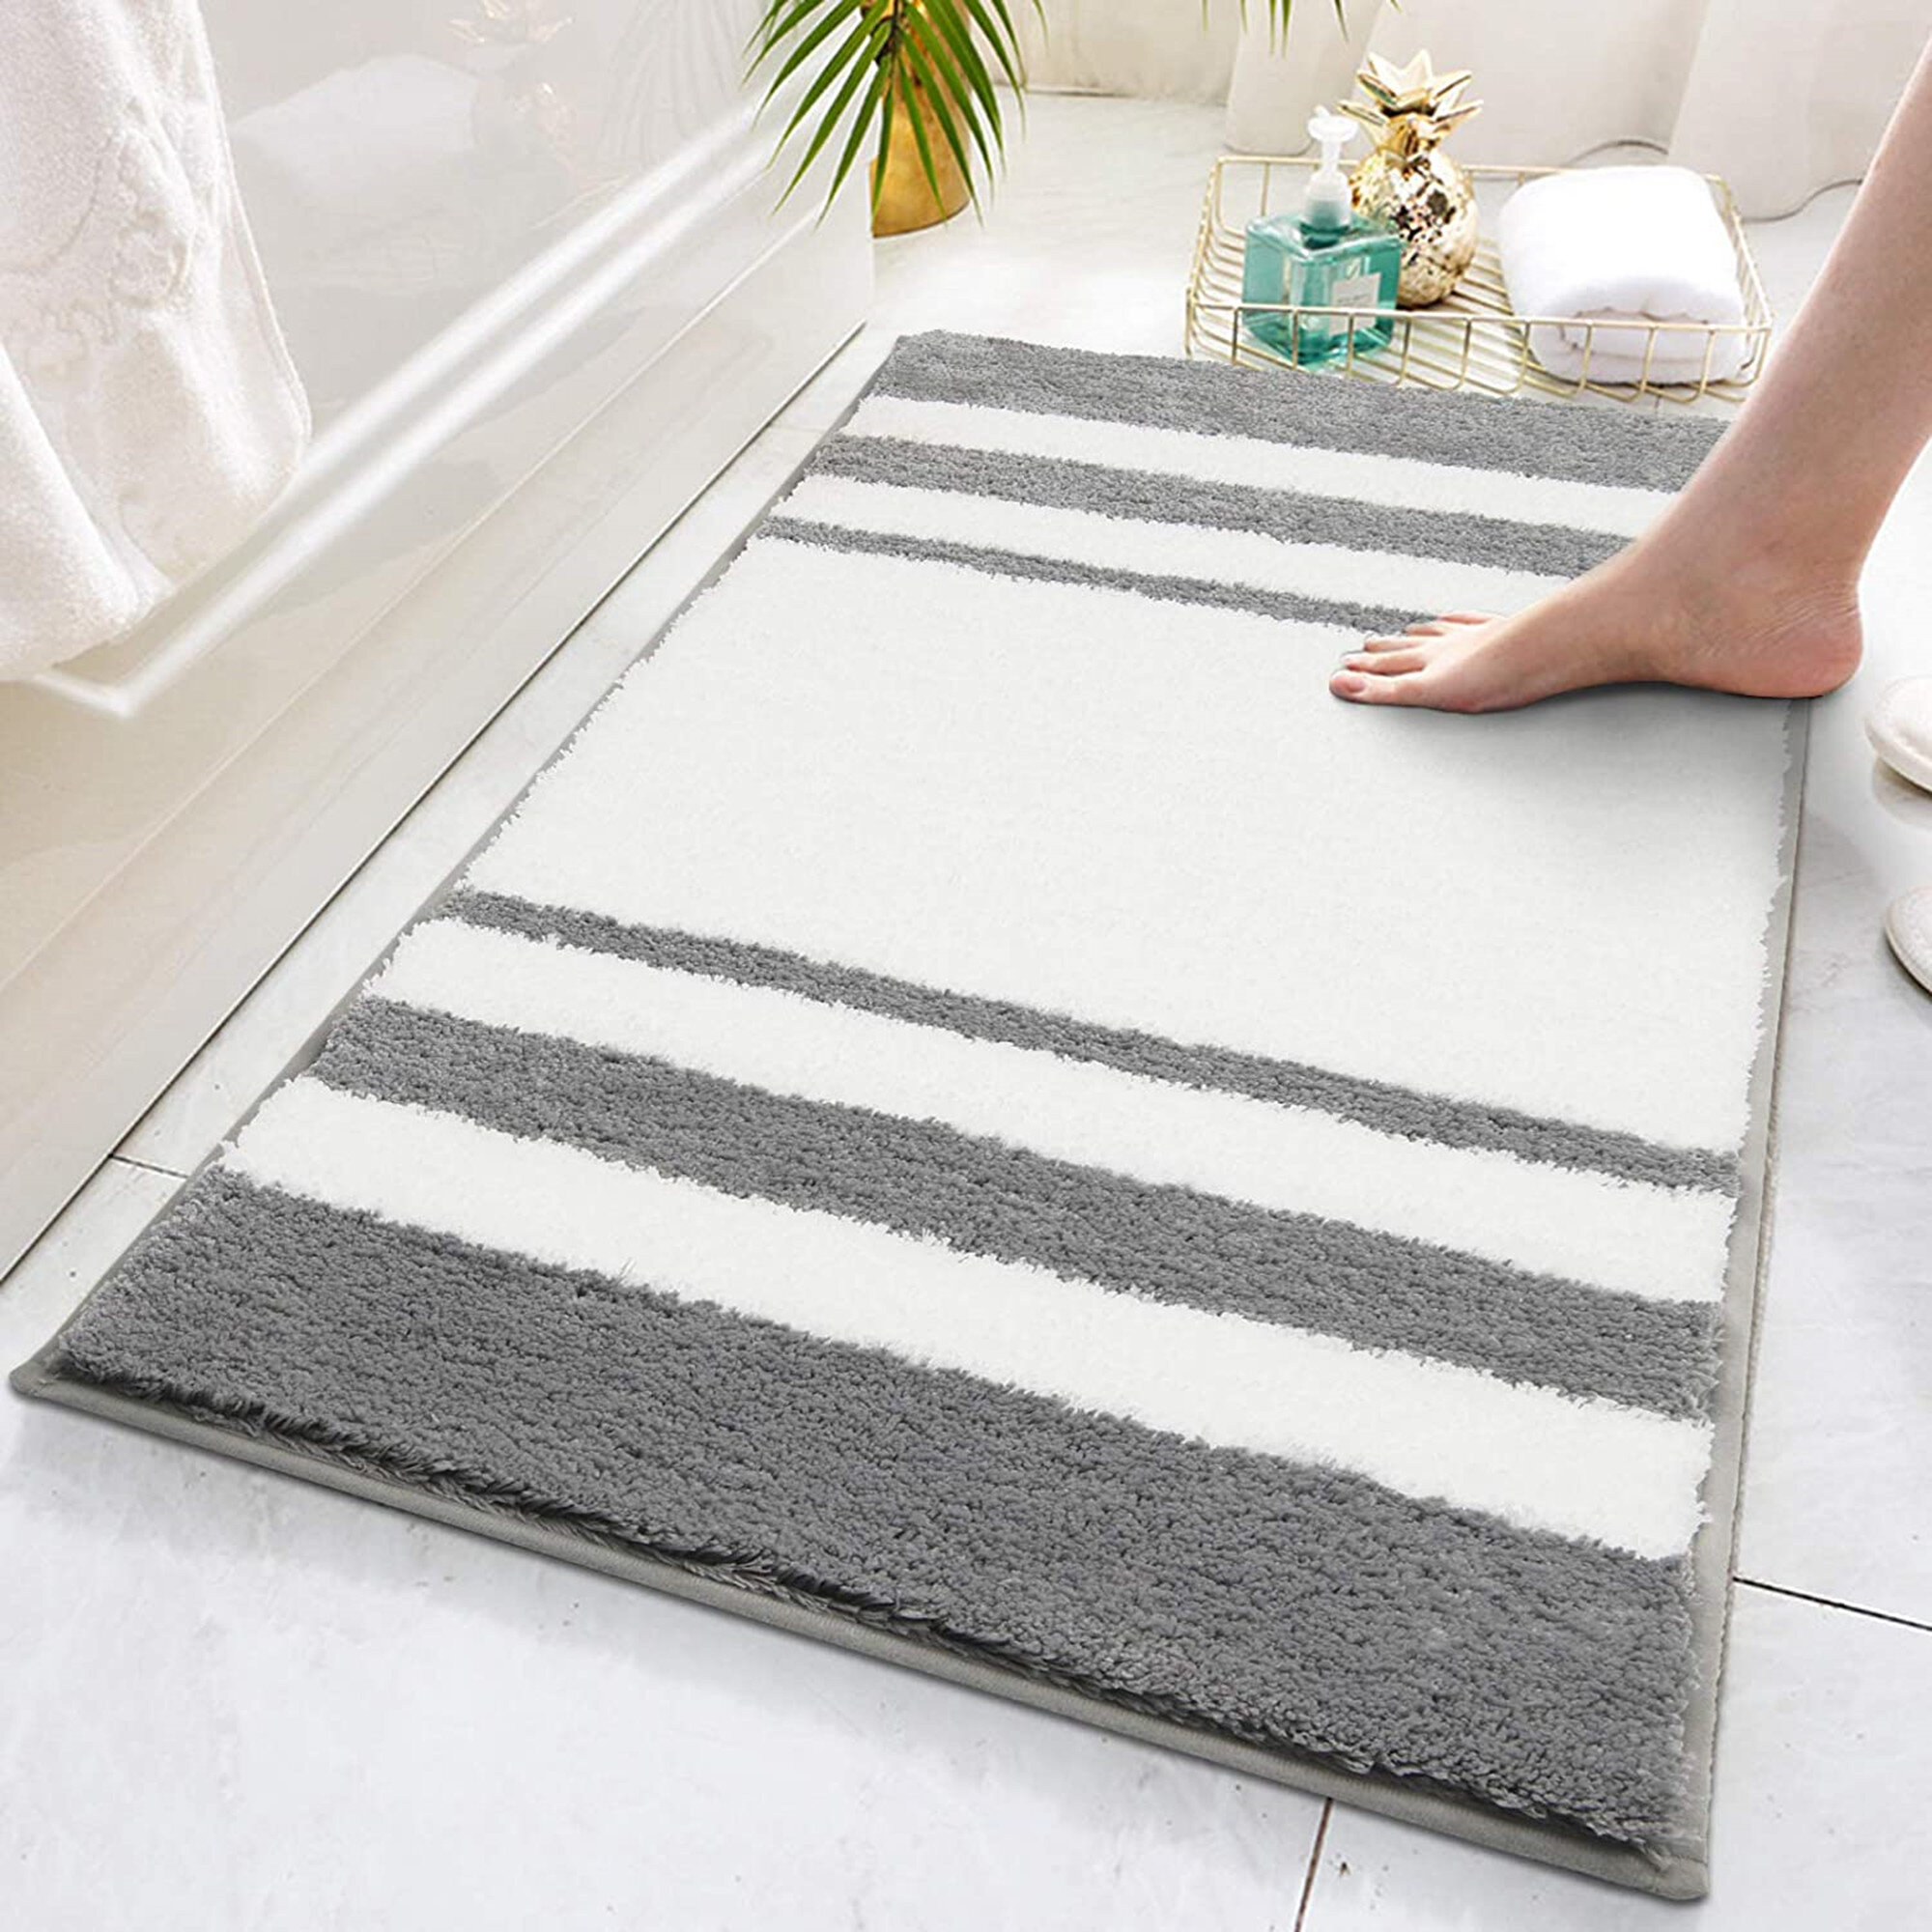 Bathroom Rug Mat 32x20 Extra Soft and Absorbent Bath Rugs 